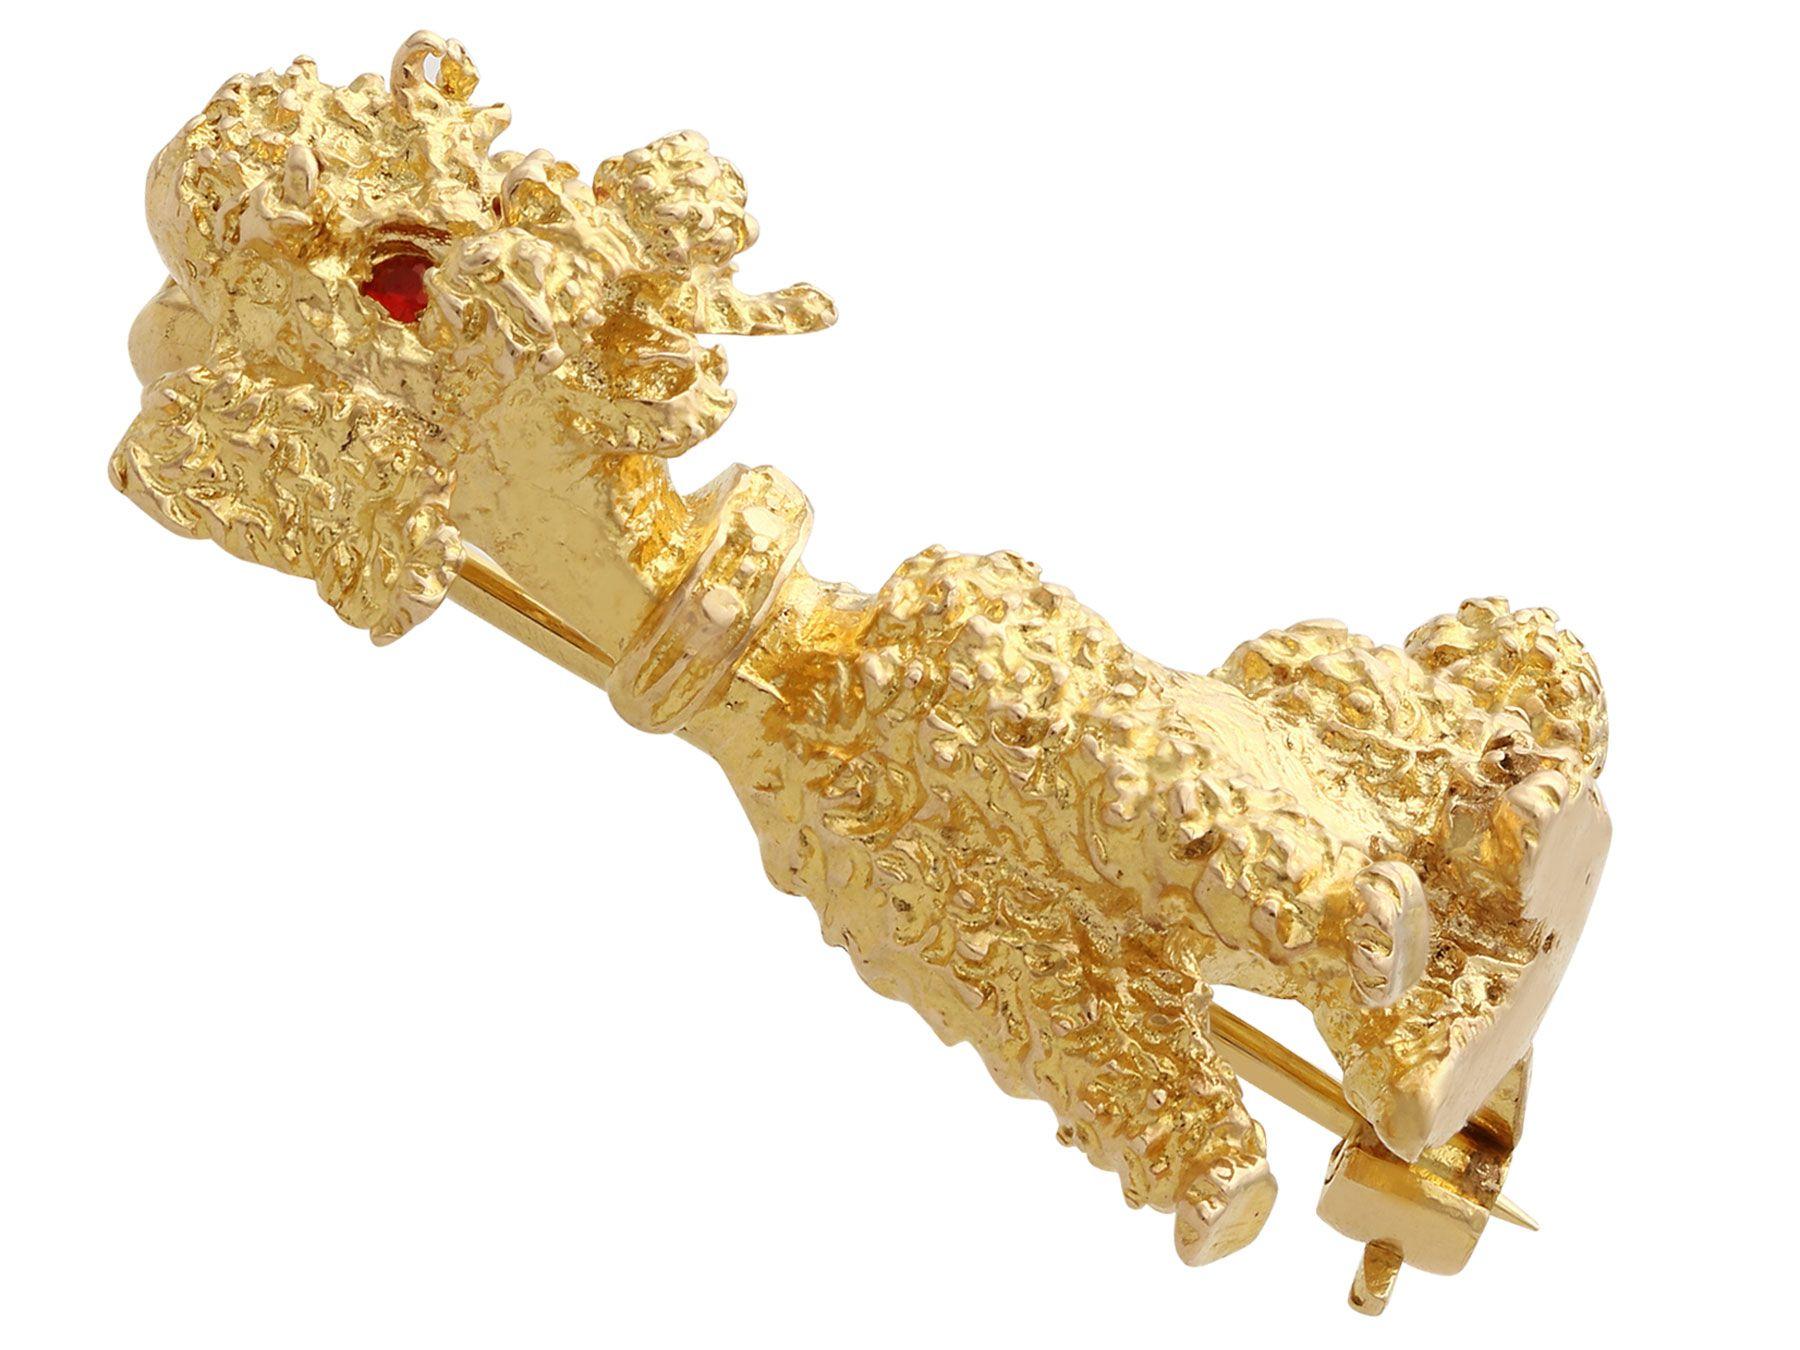 An impressive vintage English 0.03 carat garnet and 9 karat yellow gold 'poodle' brooch; part of our diverse vintage jewelry and estate jewelry collections.

This fine and impressive 9 k yellow gold brooch has been modelled in the form of a sitting